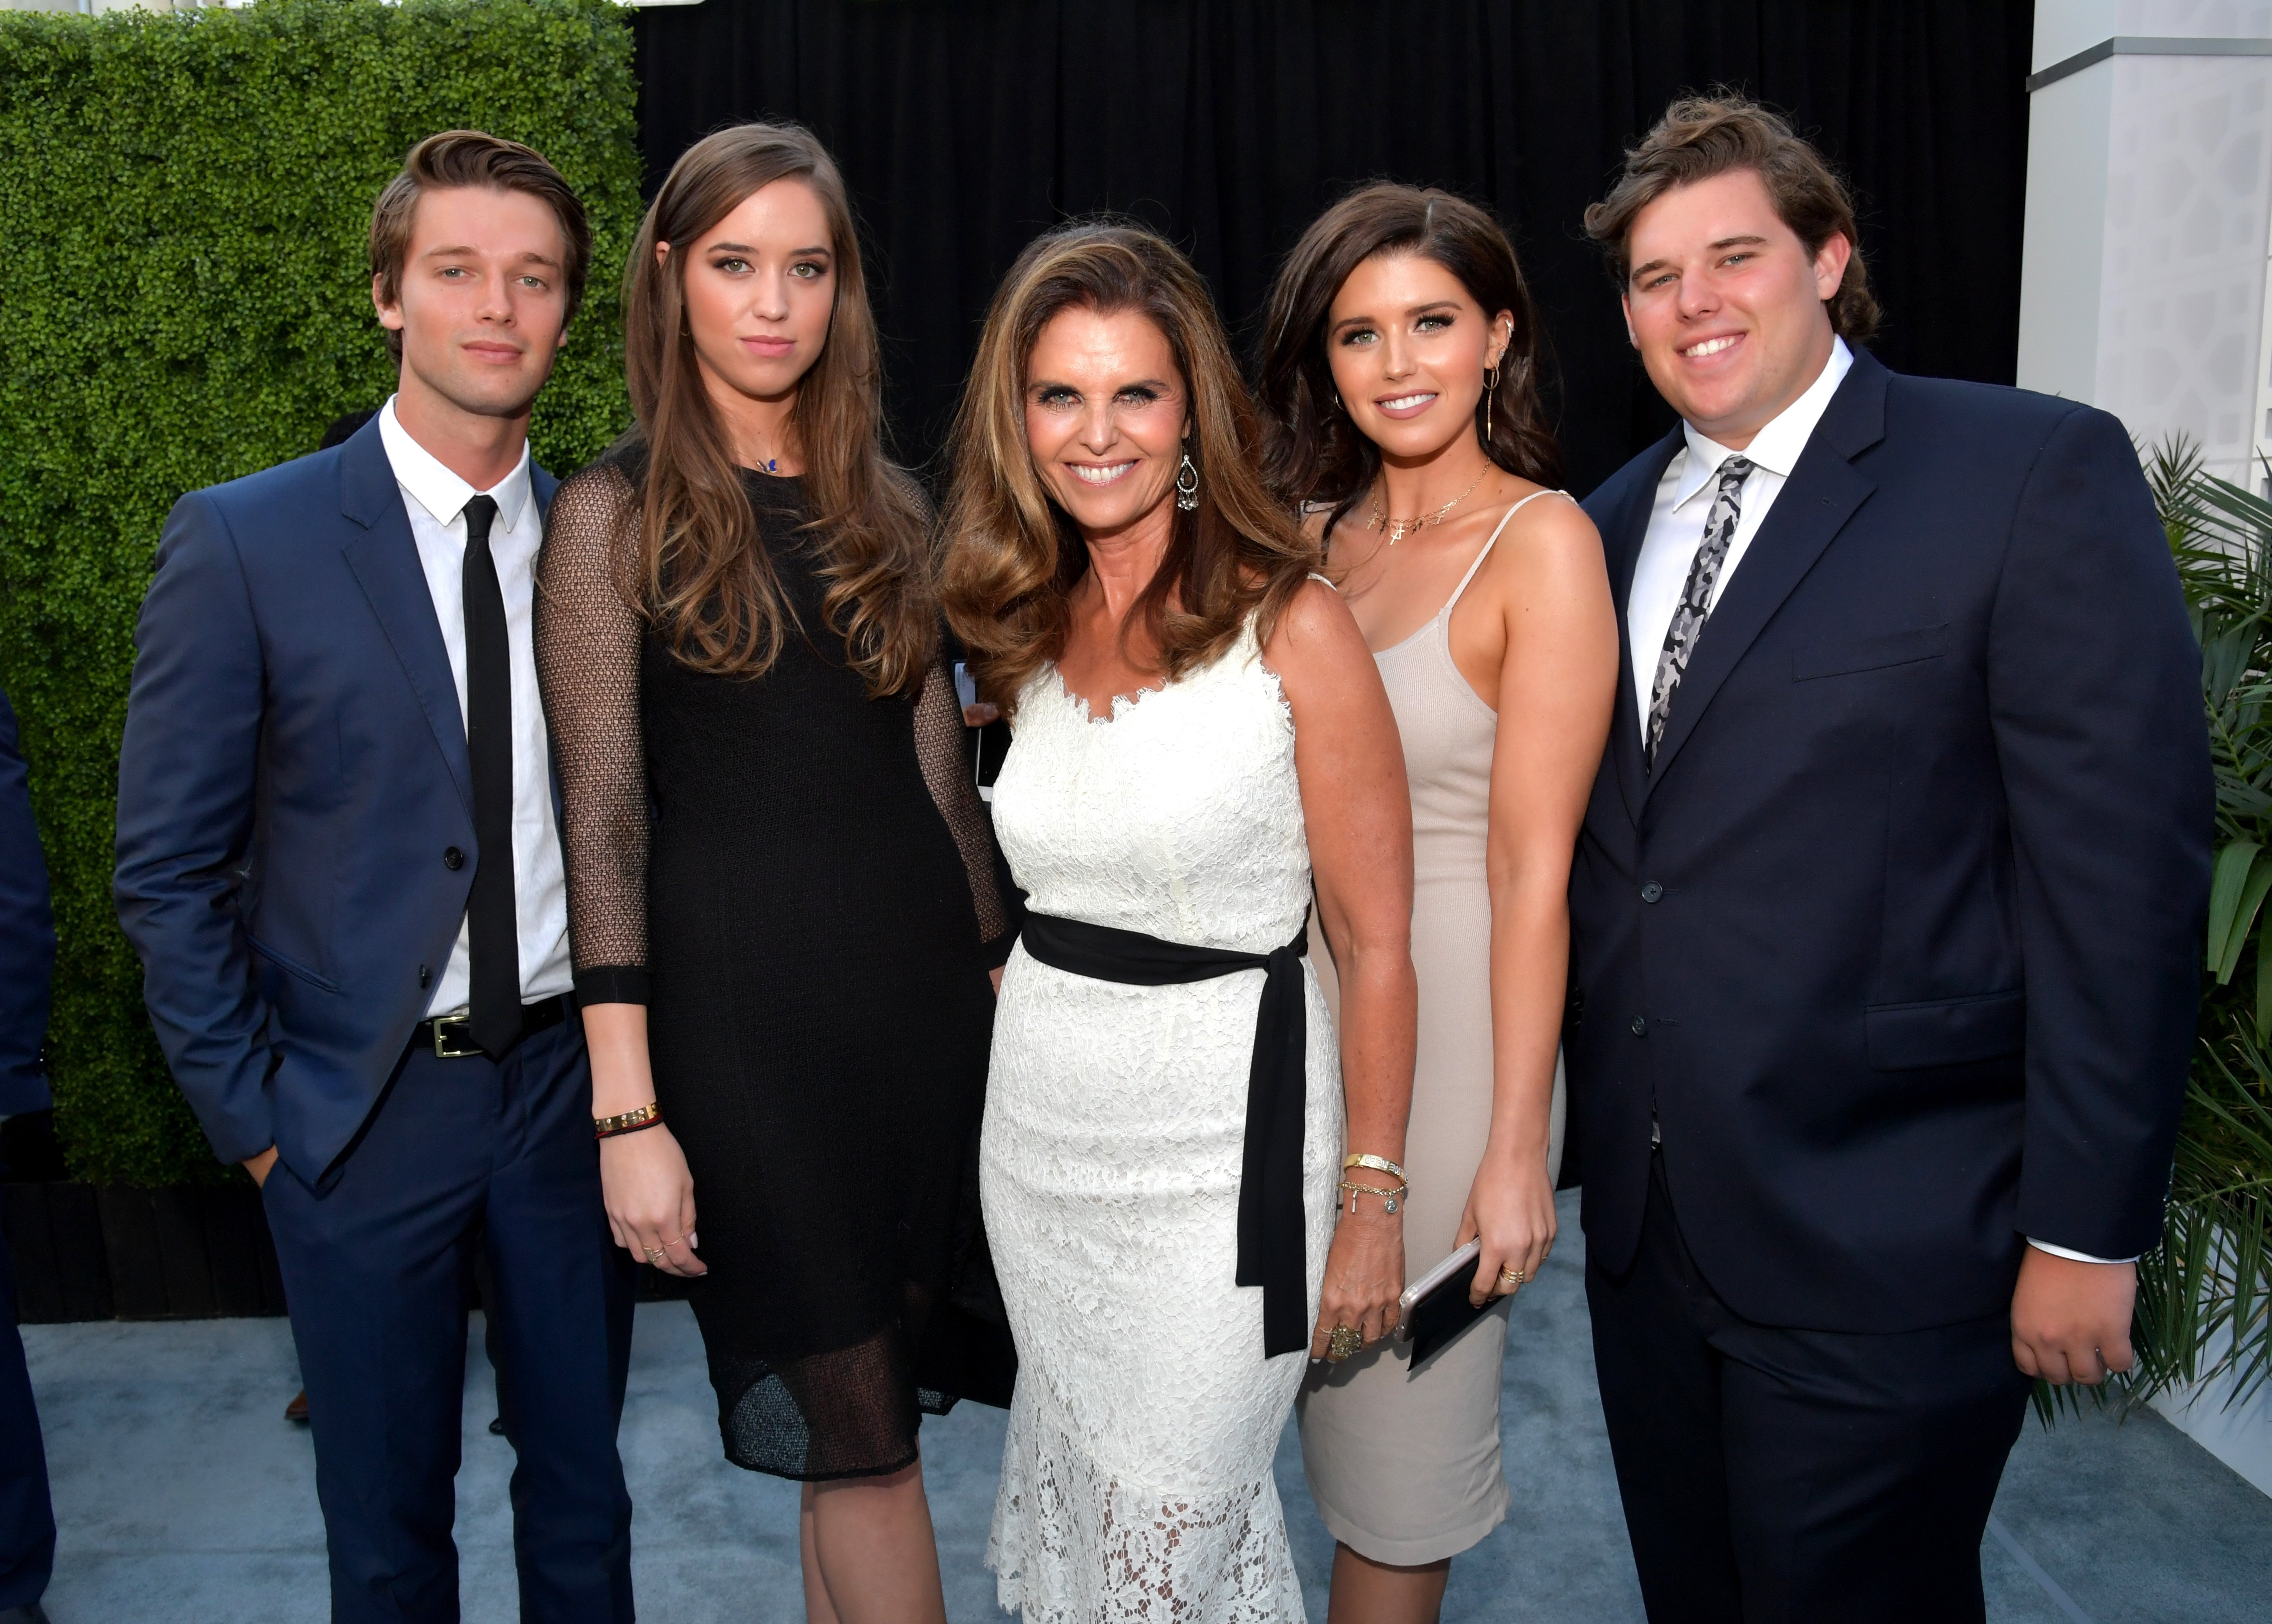 Patrick Schwarzenegger, Christina Schwarzenegger, Maria Shriver, Katherine Schwarzenegger, and Christopher Schwarzenegger at The Comedy Central Roast of Rob Lowe on August 27, 2016, in Los Angeles | Source: Getty Images